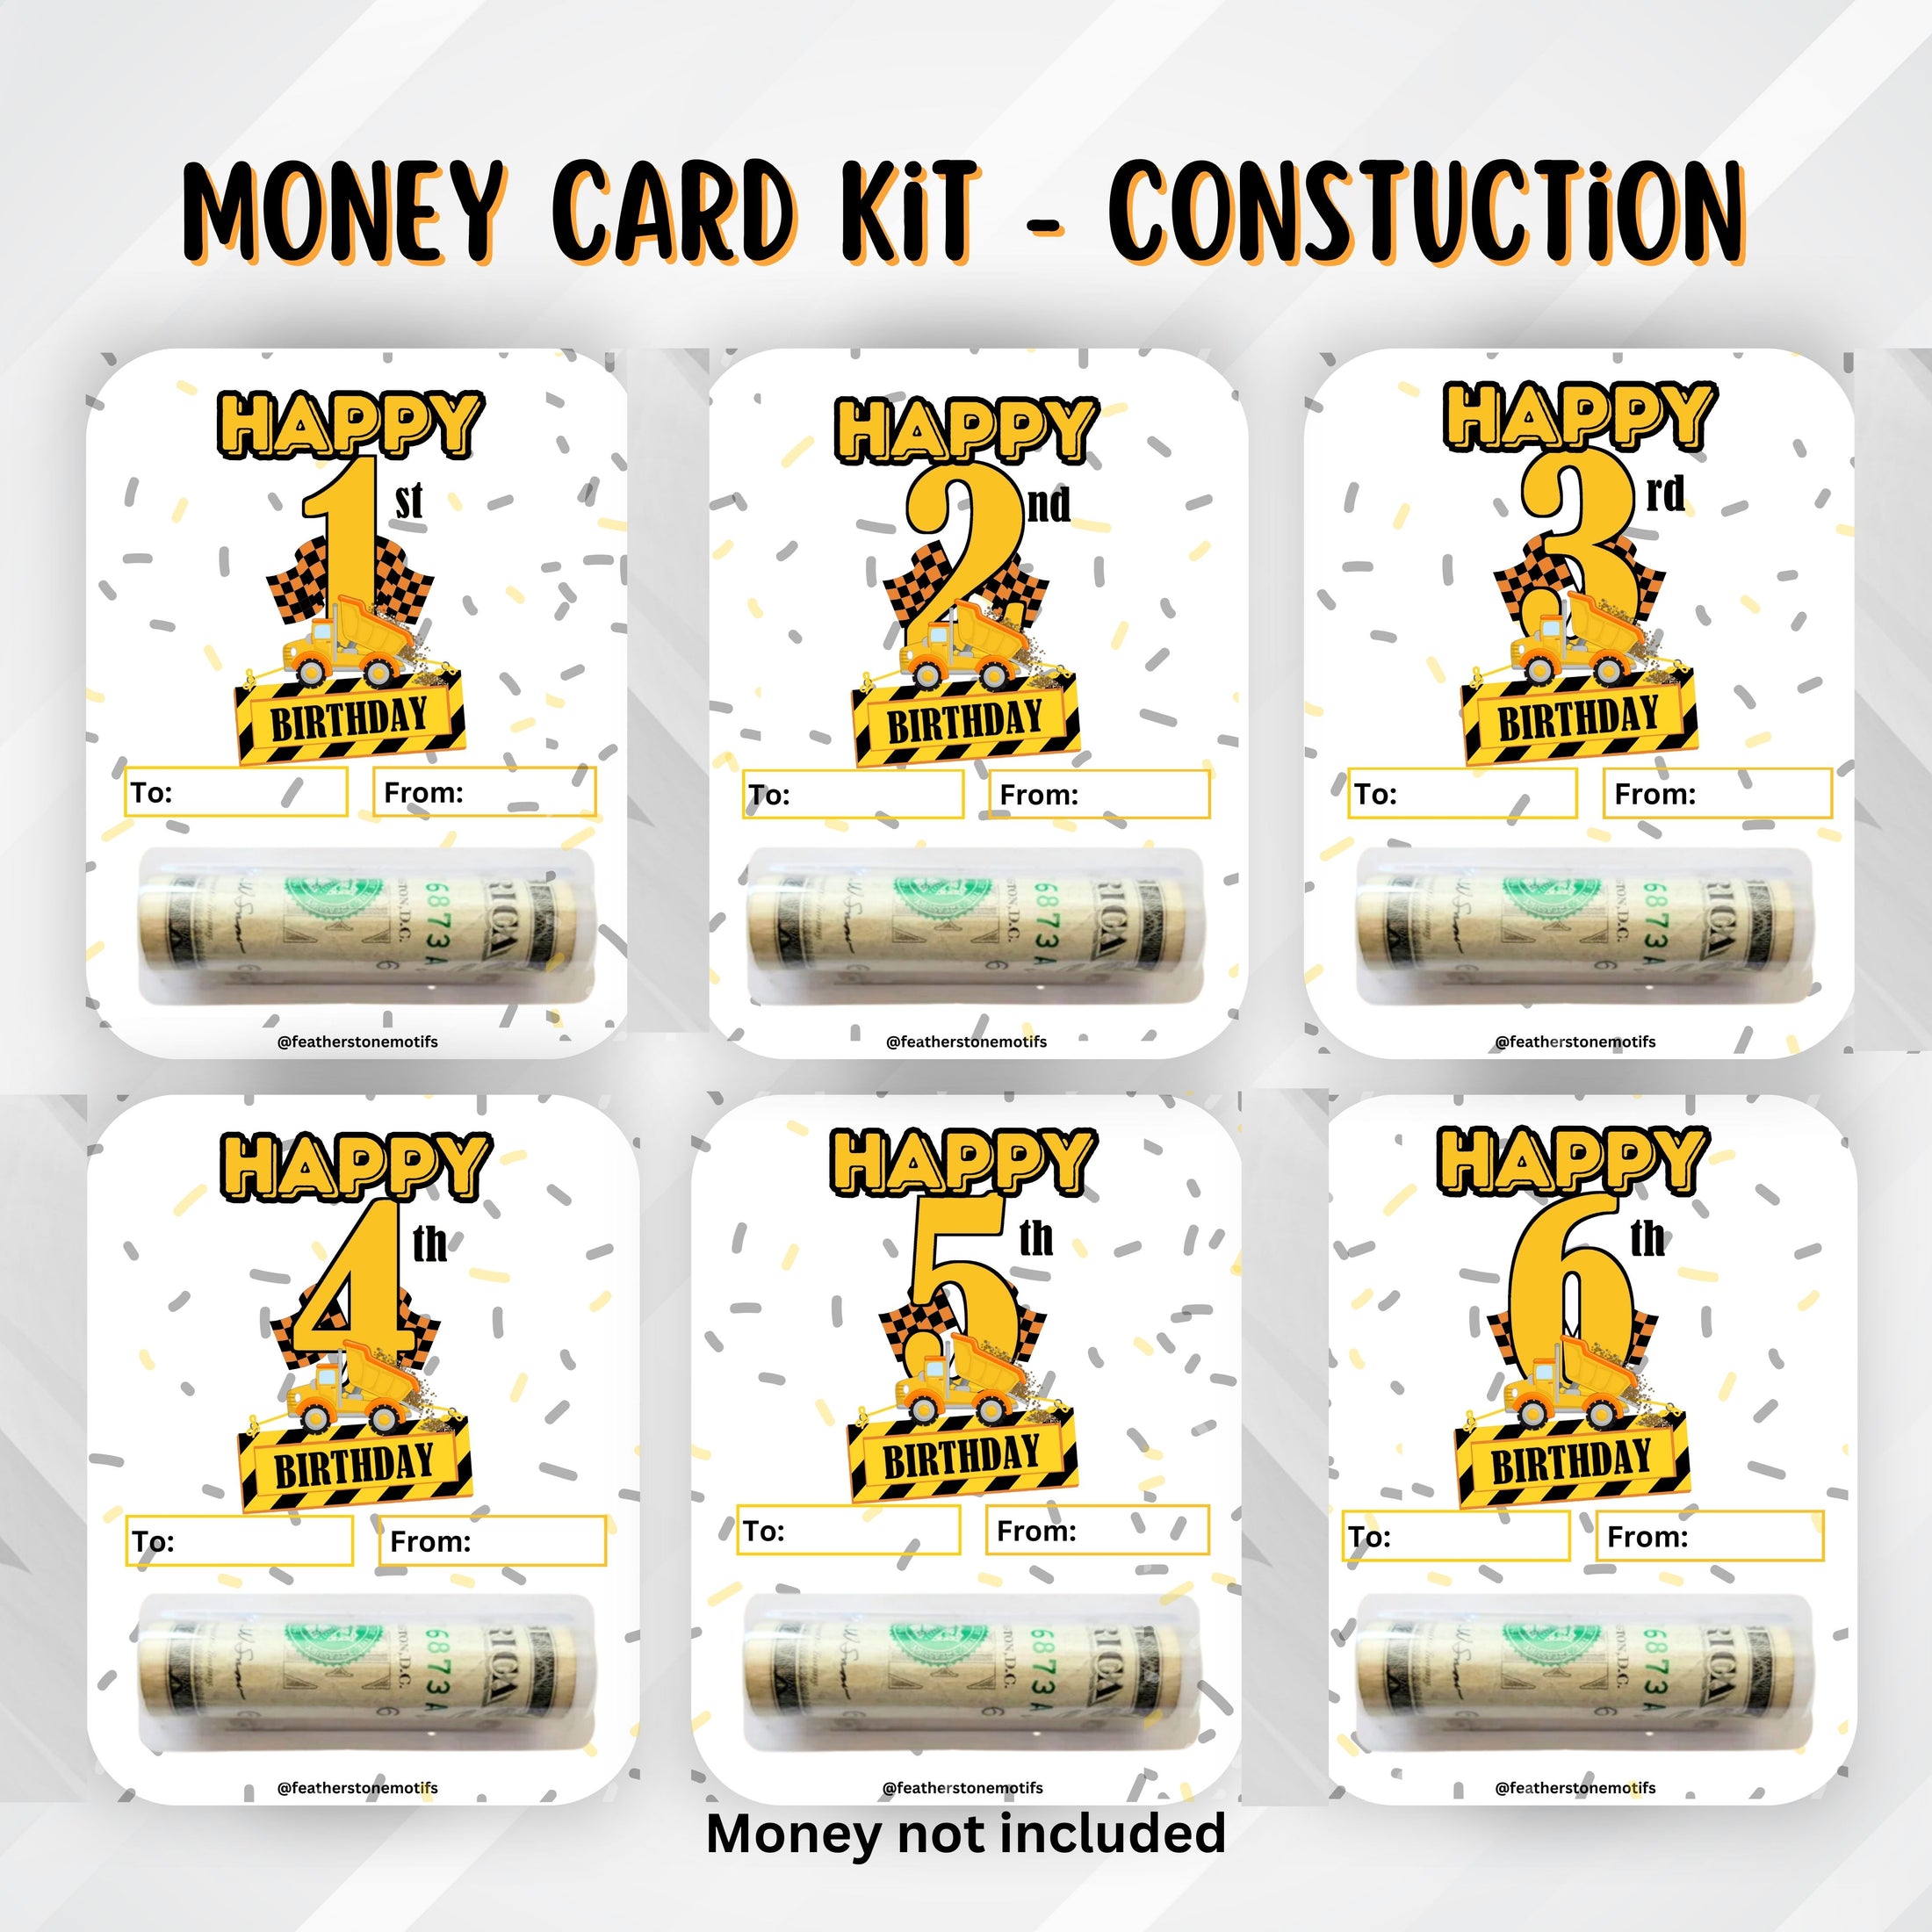 This image shows all six of the Construction Birthday Money Card sets with money tubes attached.